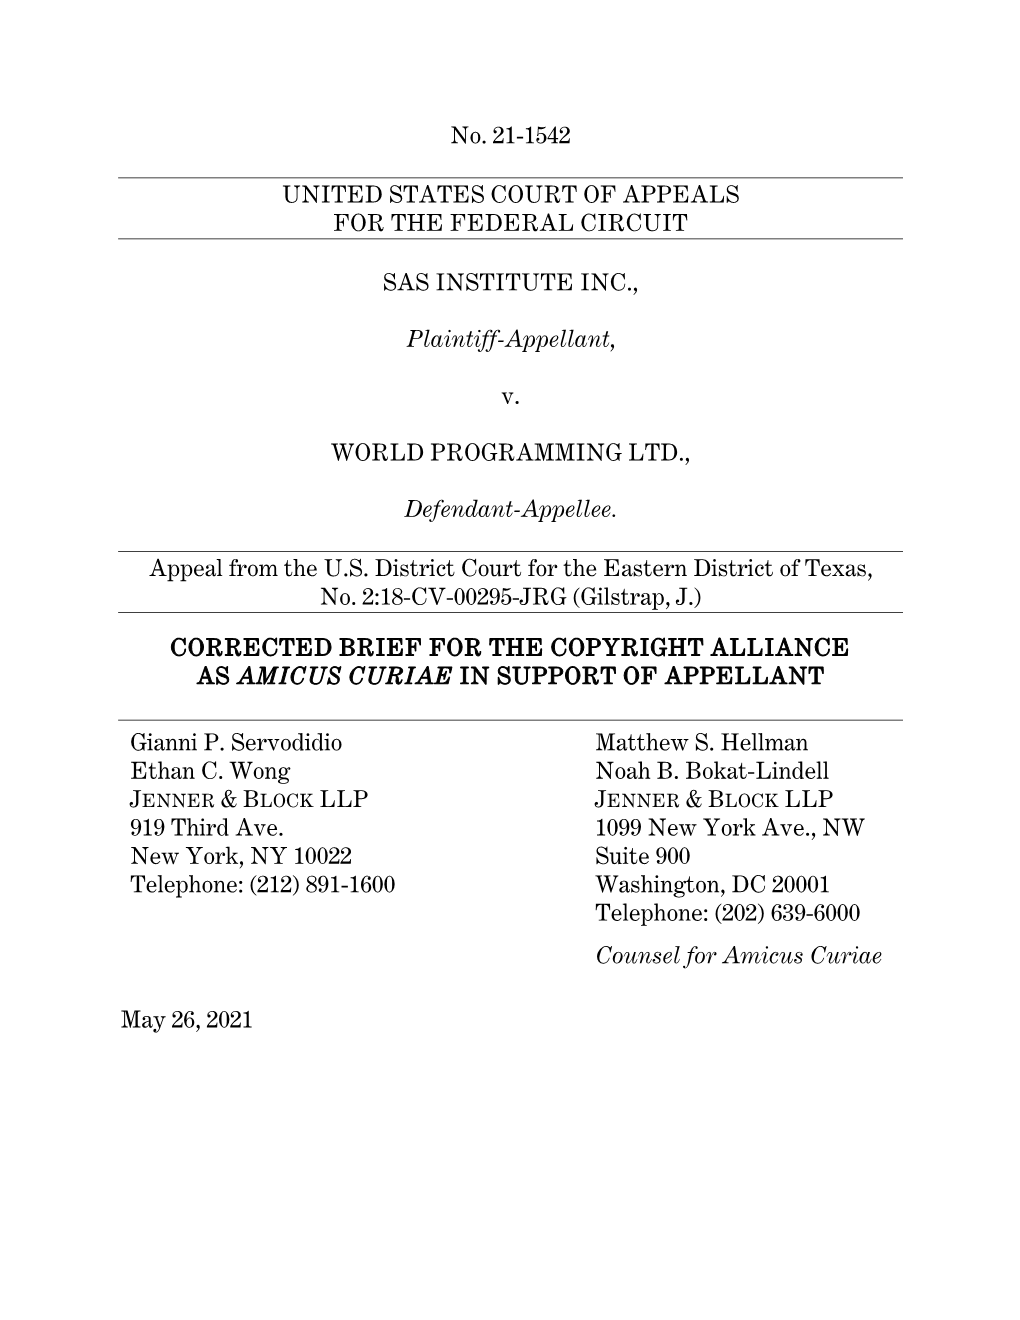 CORRECTED Copyright Alliance Amicus Brief for FILING